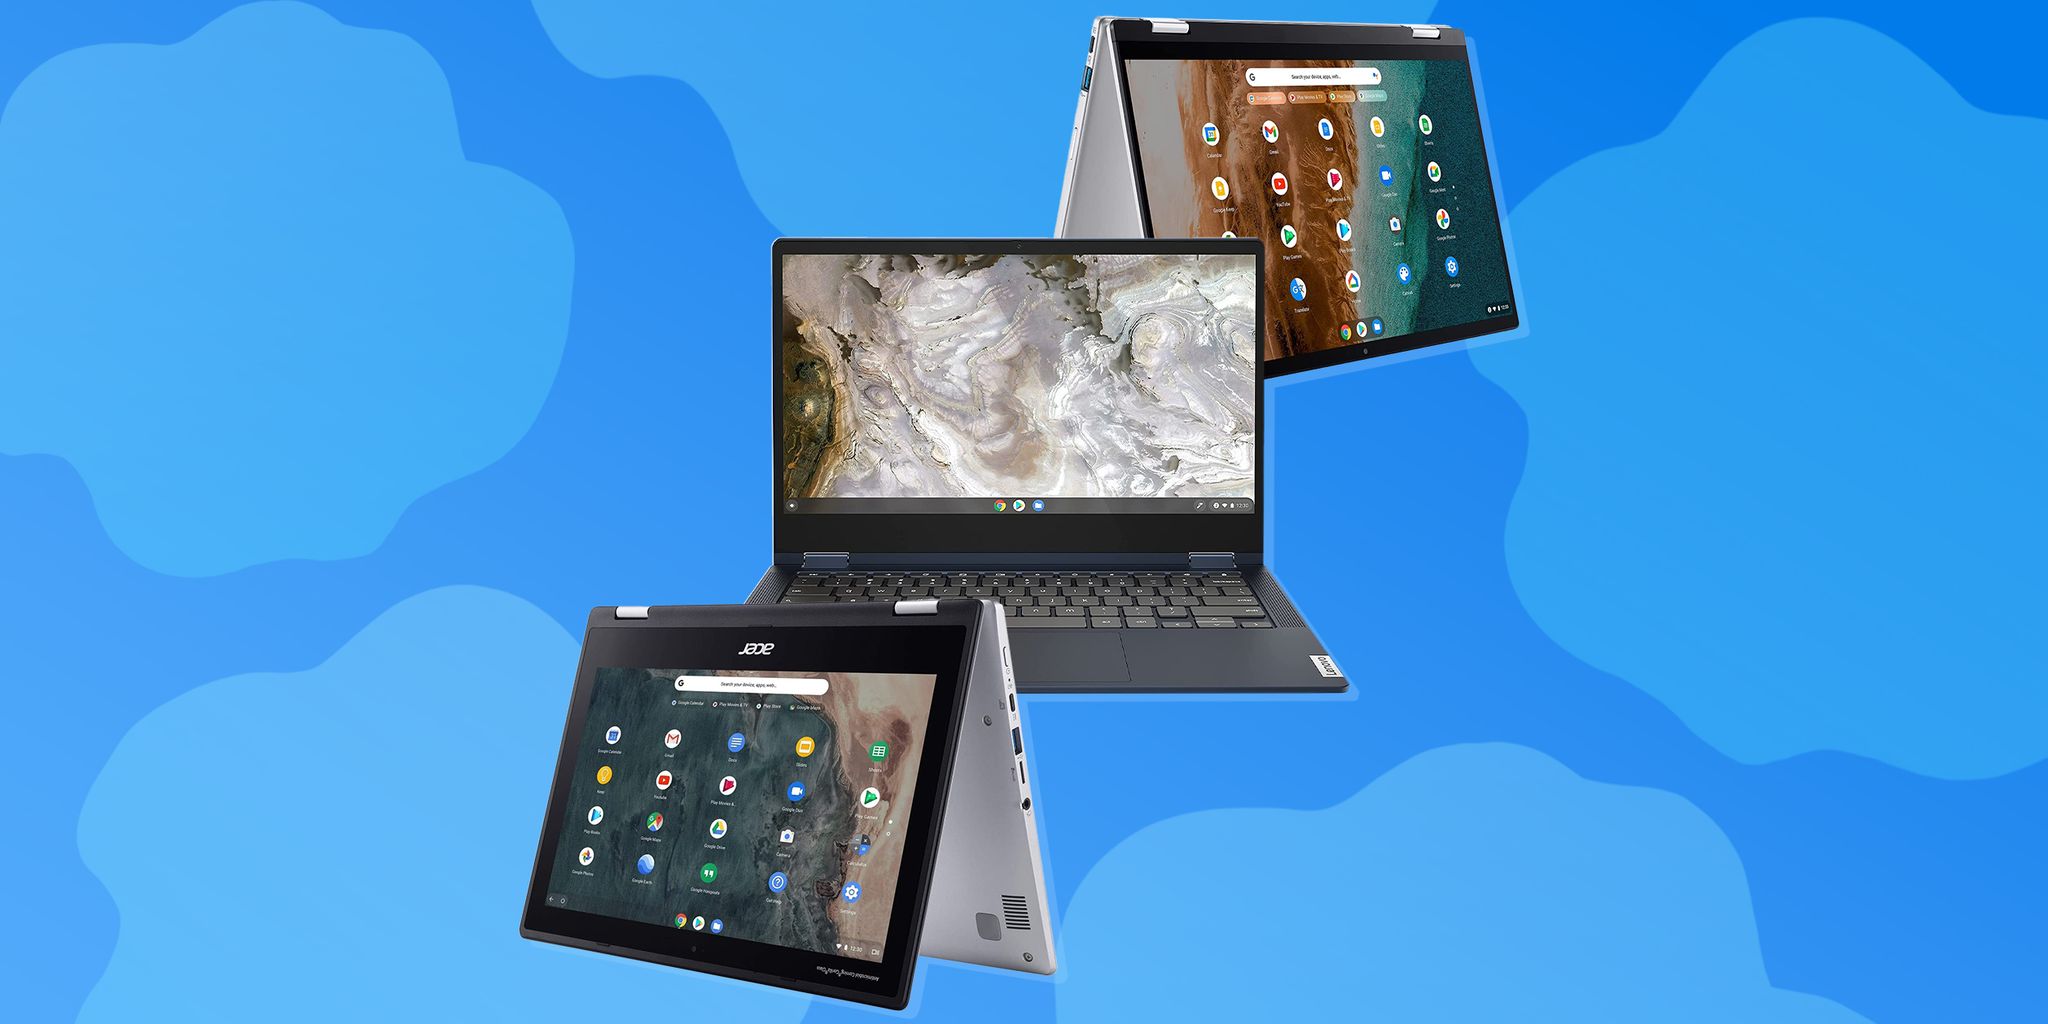 best chromebooks including 2 in 1 laptops, touchscreens, and convertible laptops